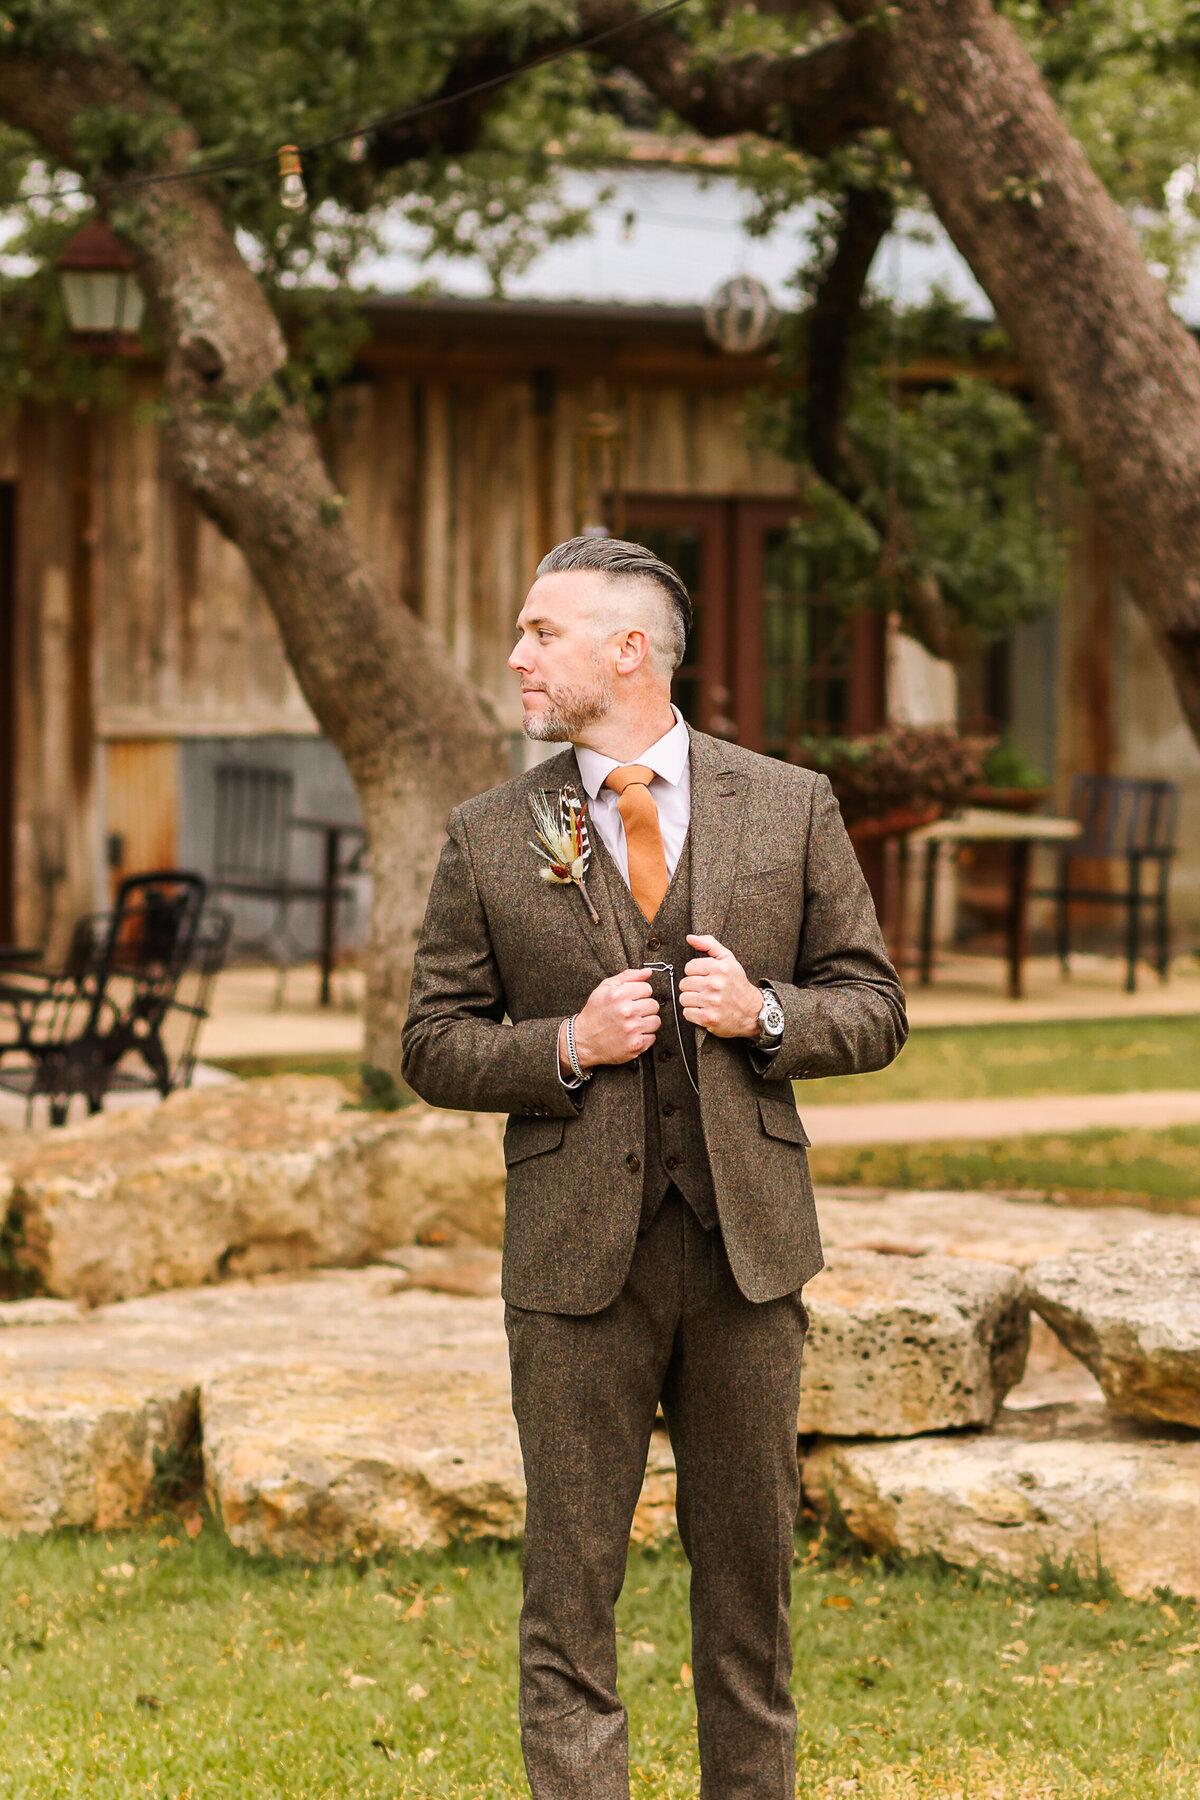 Embark on a Texas adventure at Vista West Ranch. An untraditional wedding filled with boho chic vibes, epic parties, and the freedom to celebrate your way.